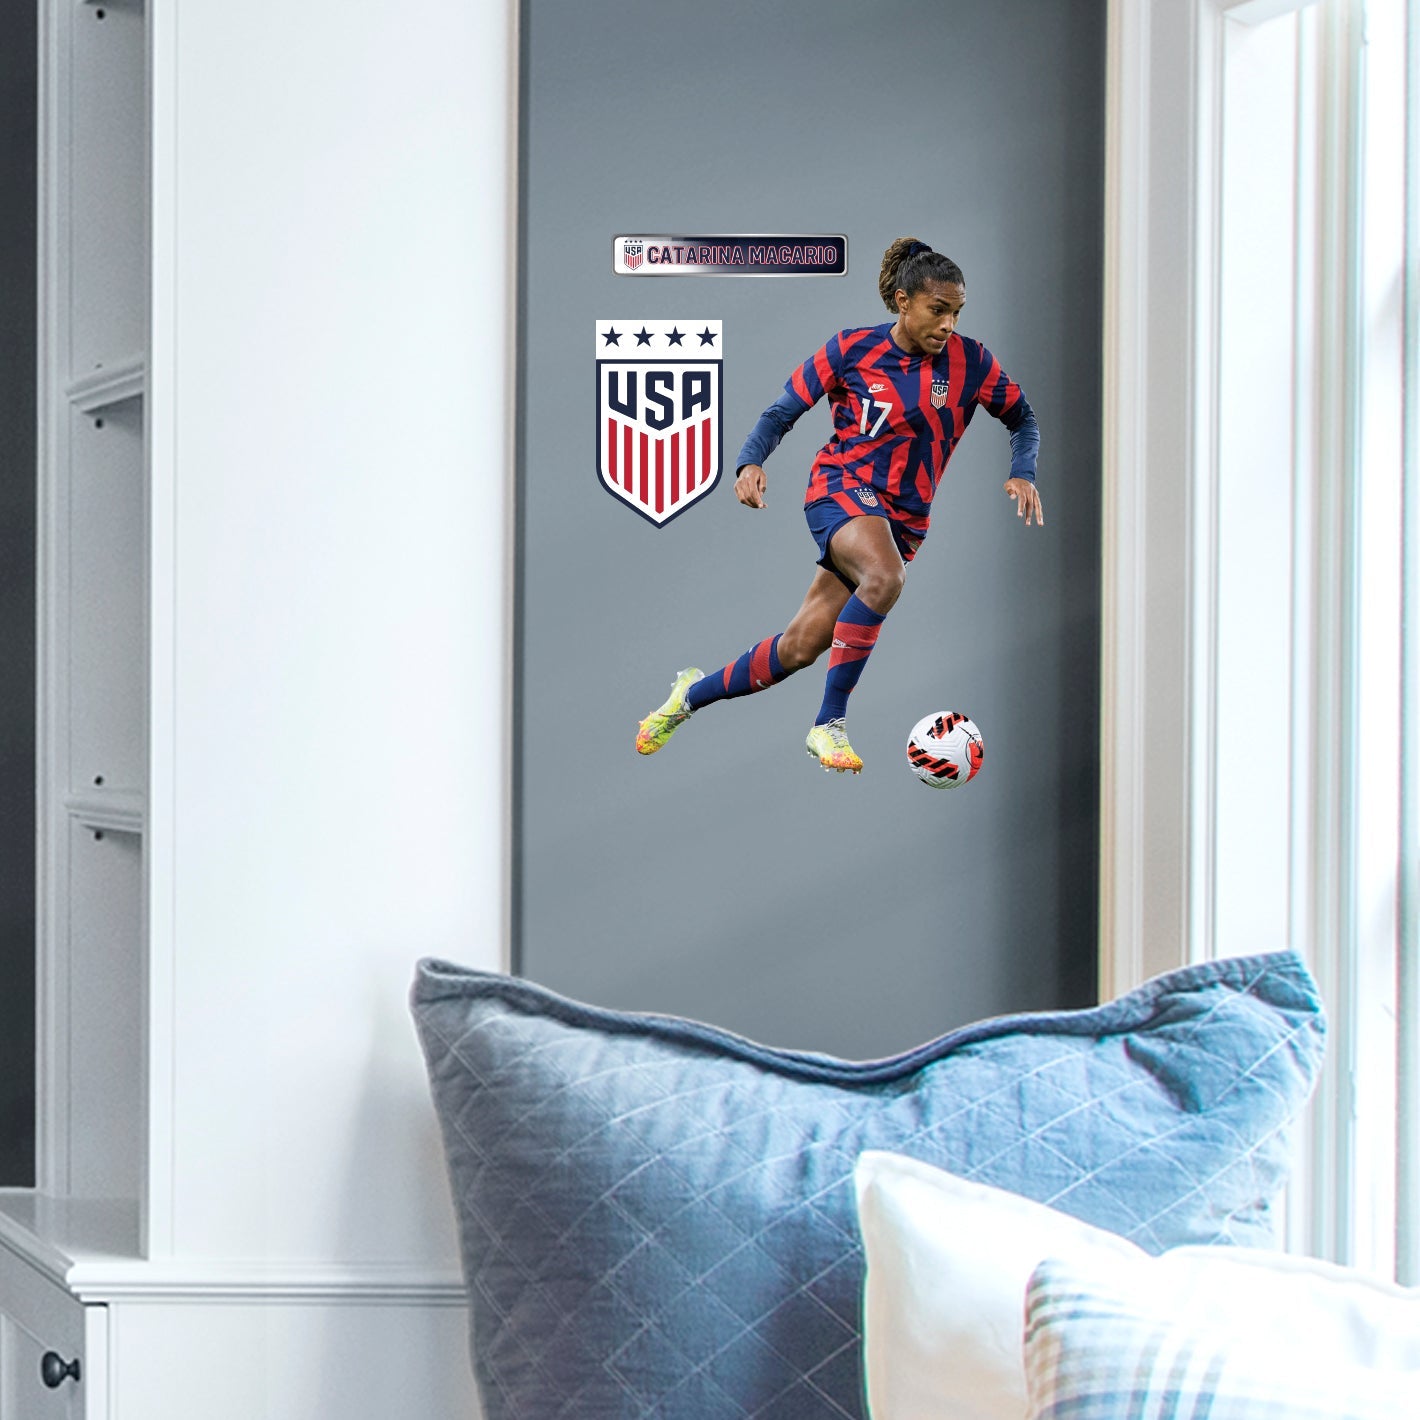 Catarina Macario RealBig - Officially Licensed USWNT Removable Adhesive Decal